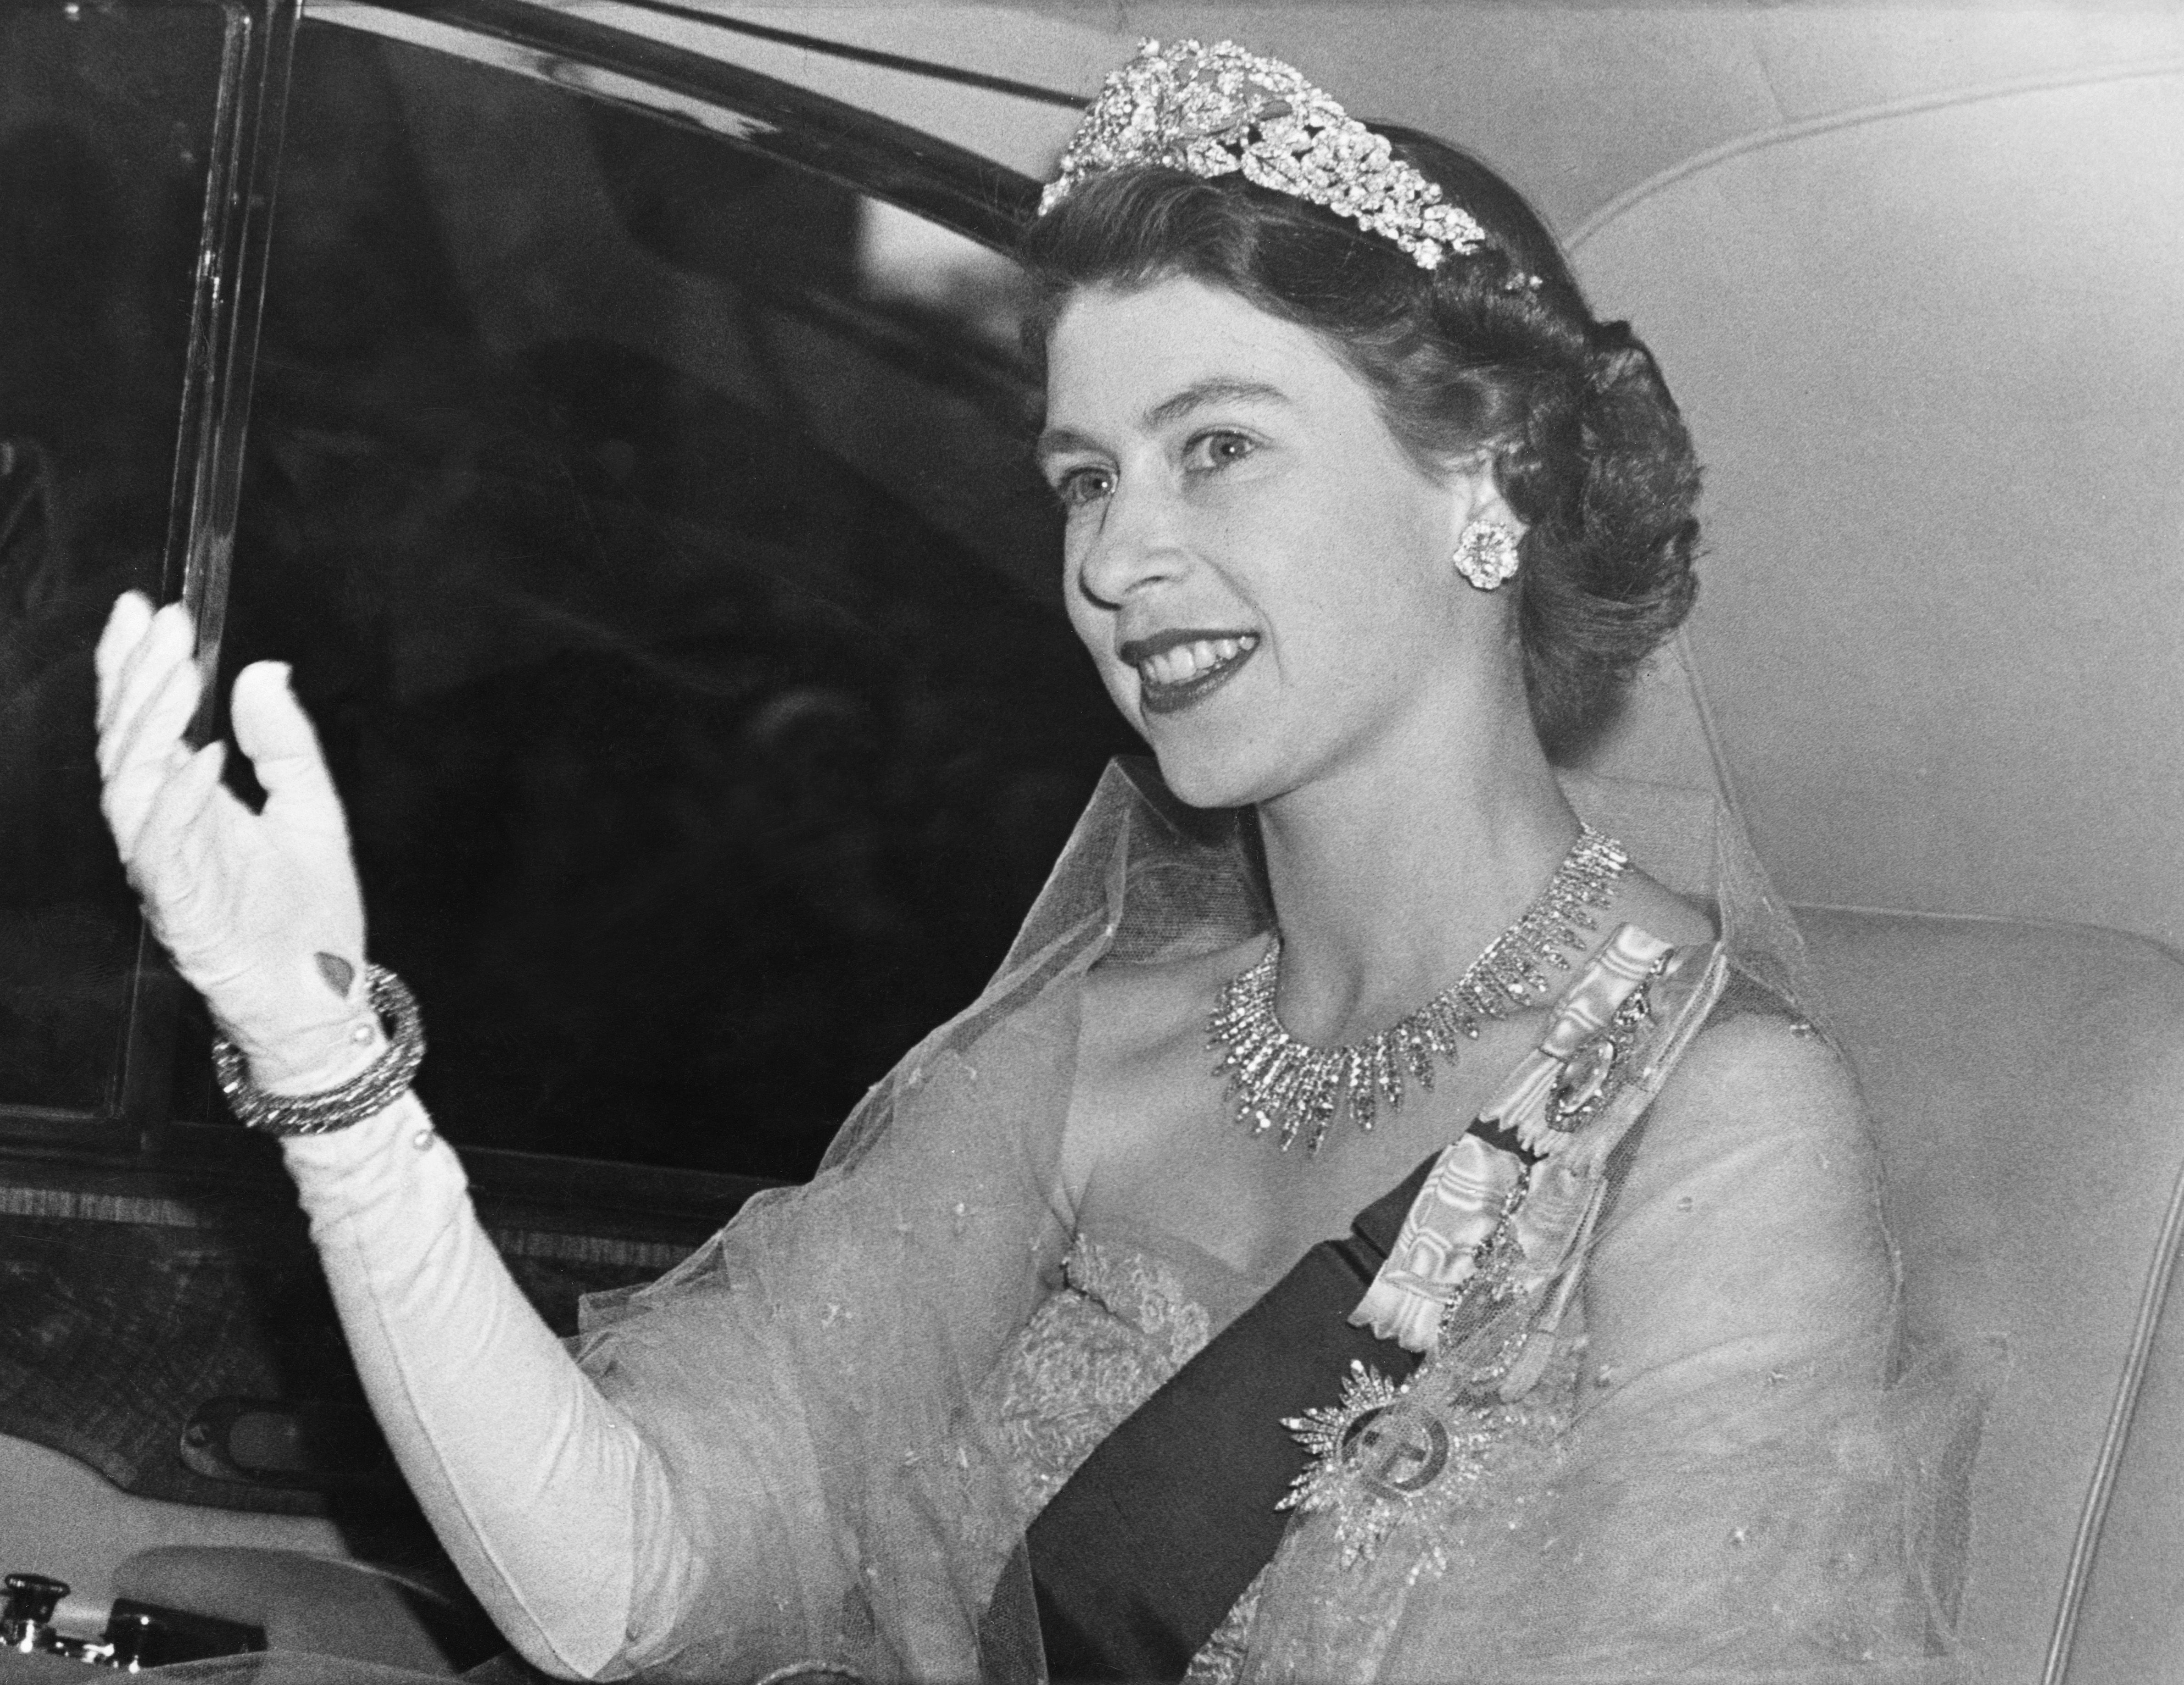 Princess Elizabeth at the Norwegian Embassy in London for a dinner party hosted by King Haakon VII of Norway, in June 1951 | Source: Getty Images